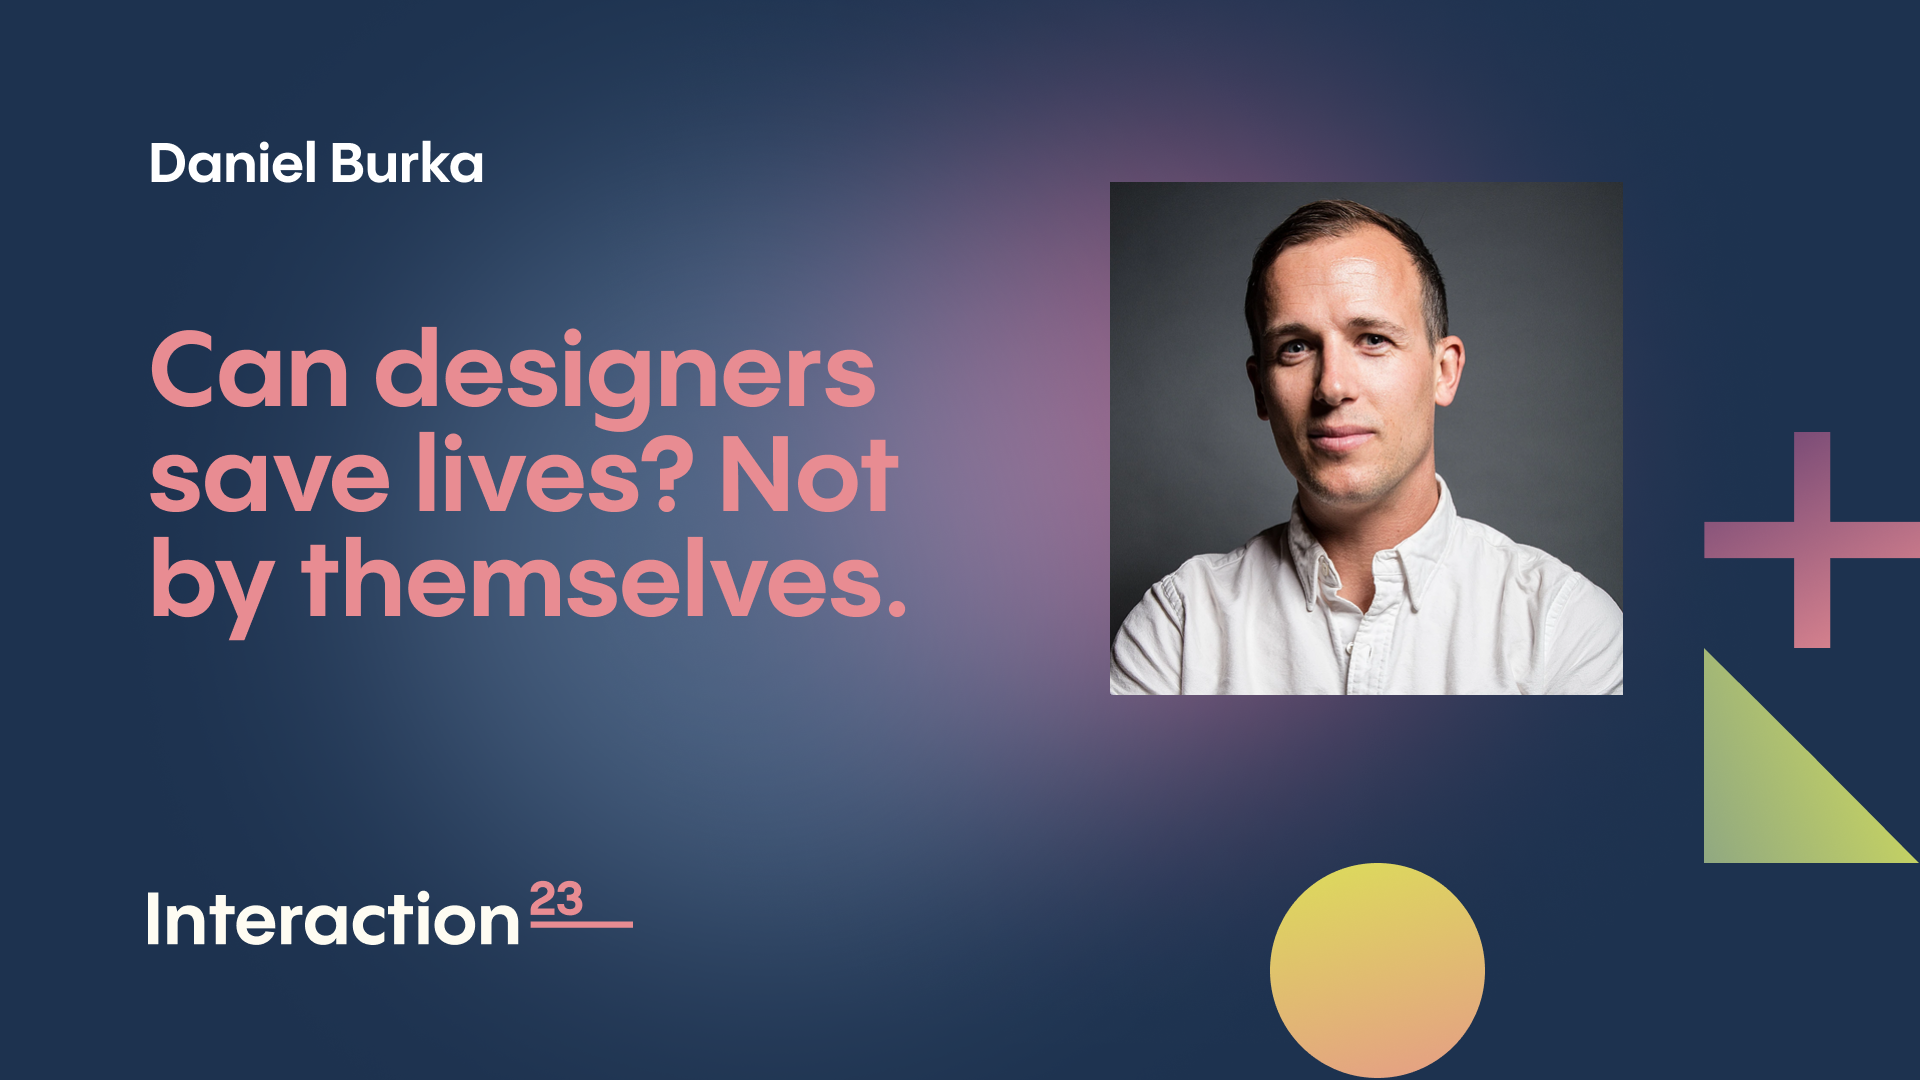 Can designers save lives? Not by themselves.